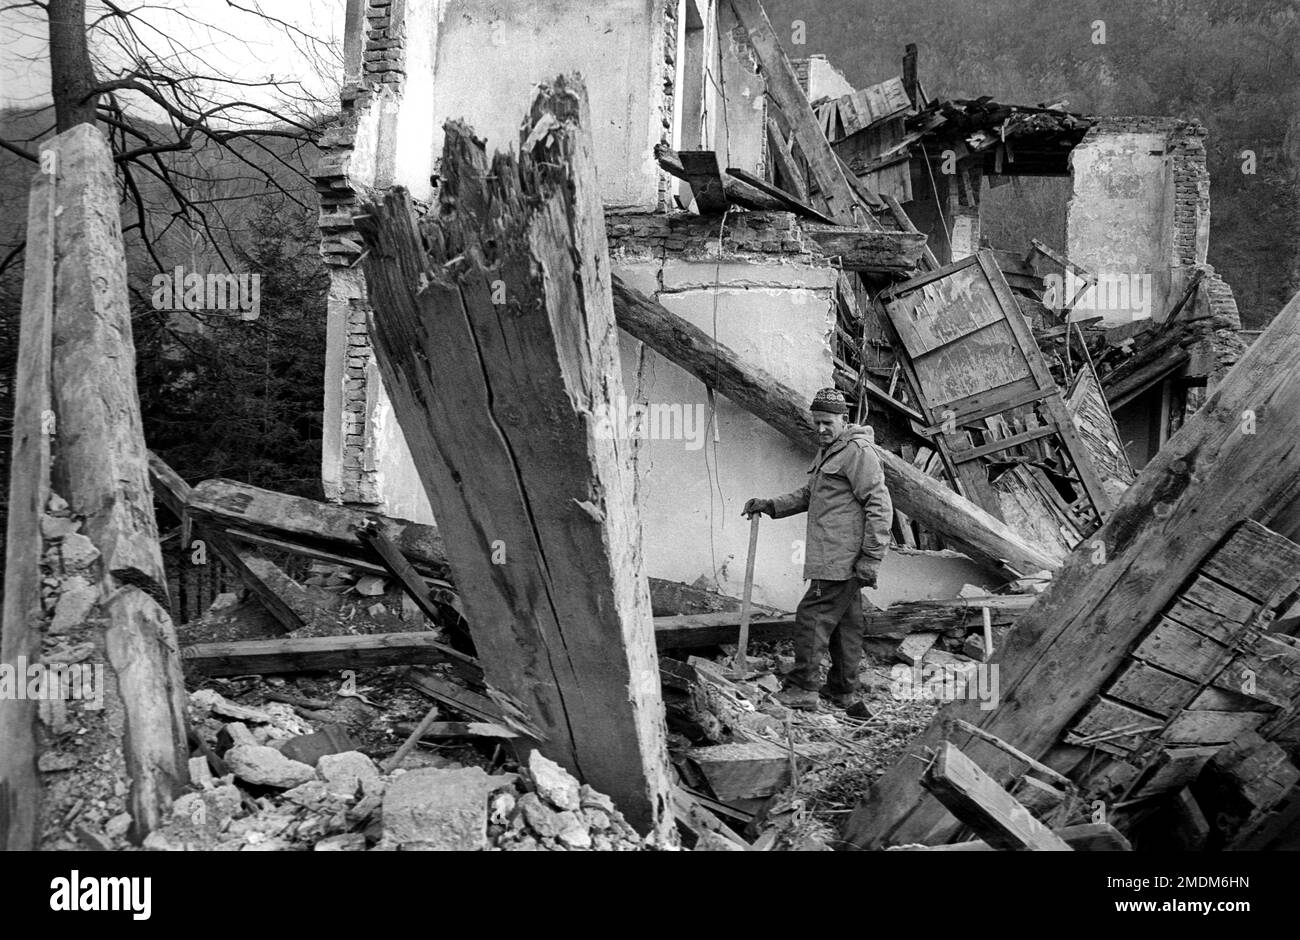 A man stands in the ruins of his house destroyed by a bomb in the civil war in Bosnia in 1994 Stock Photo